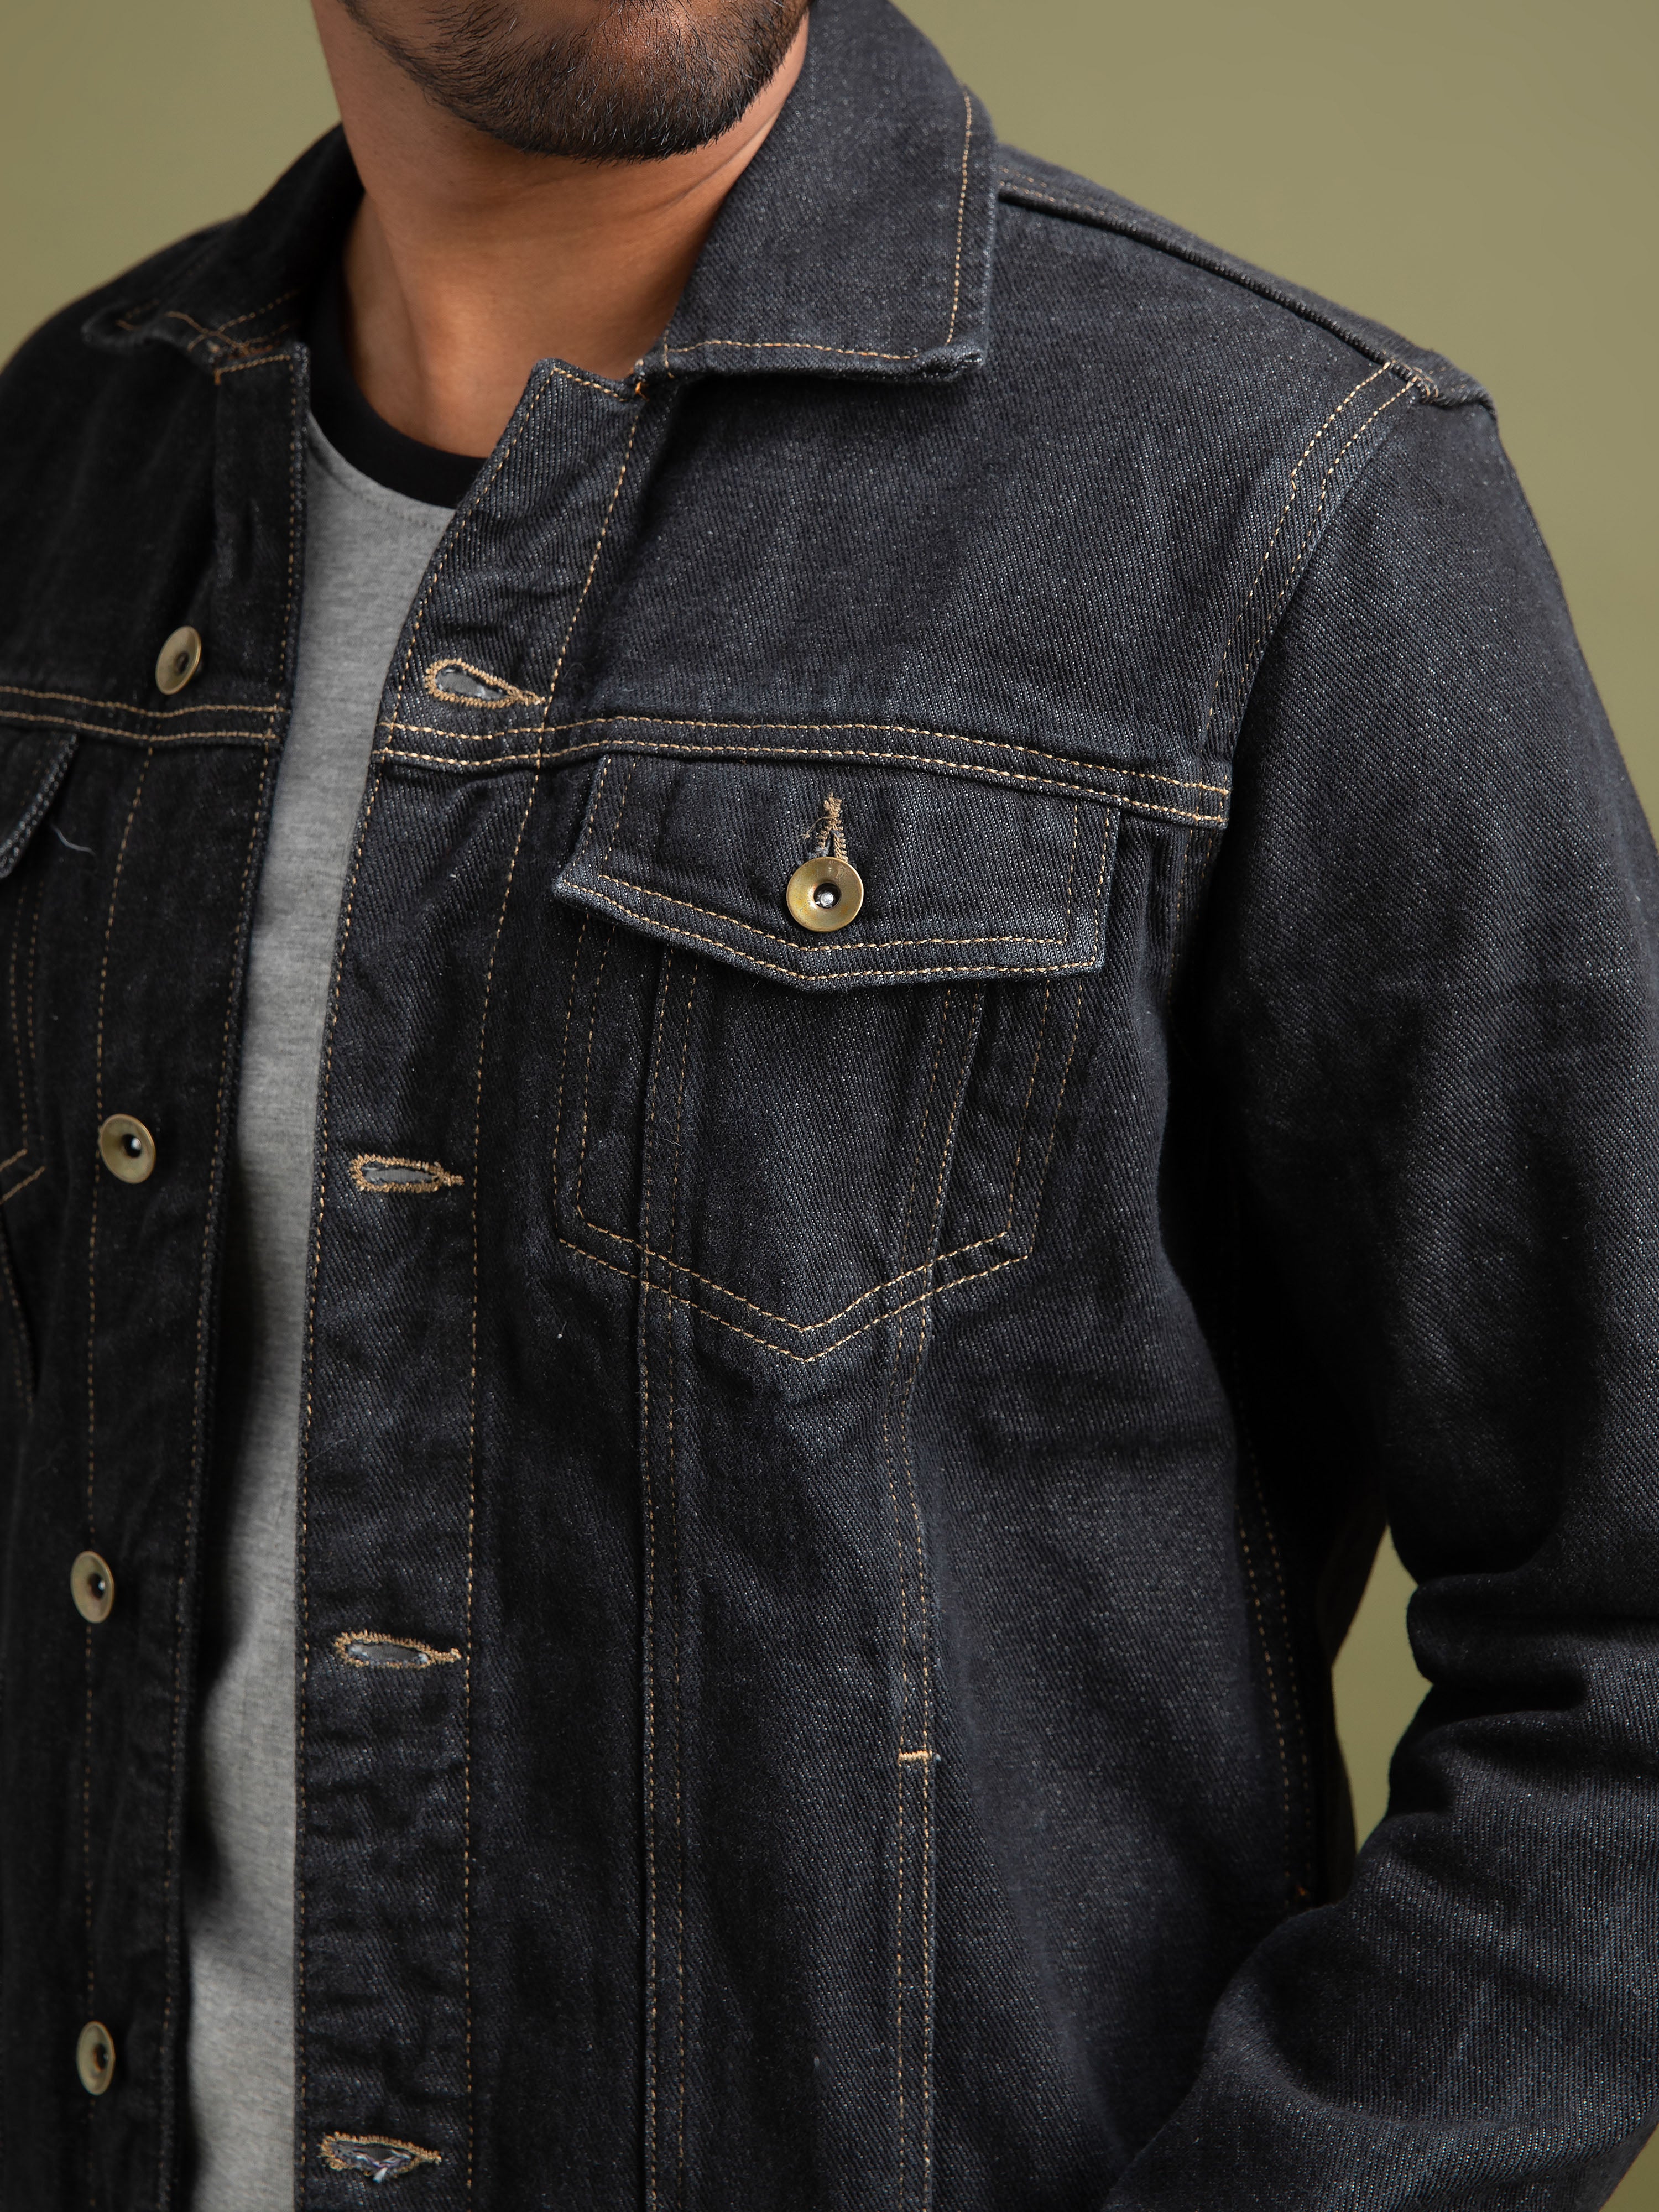 Chase Leather Jean Jacket